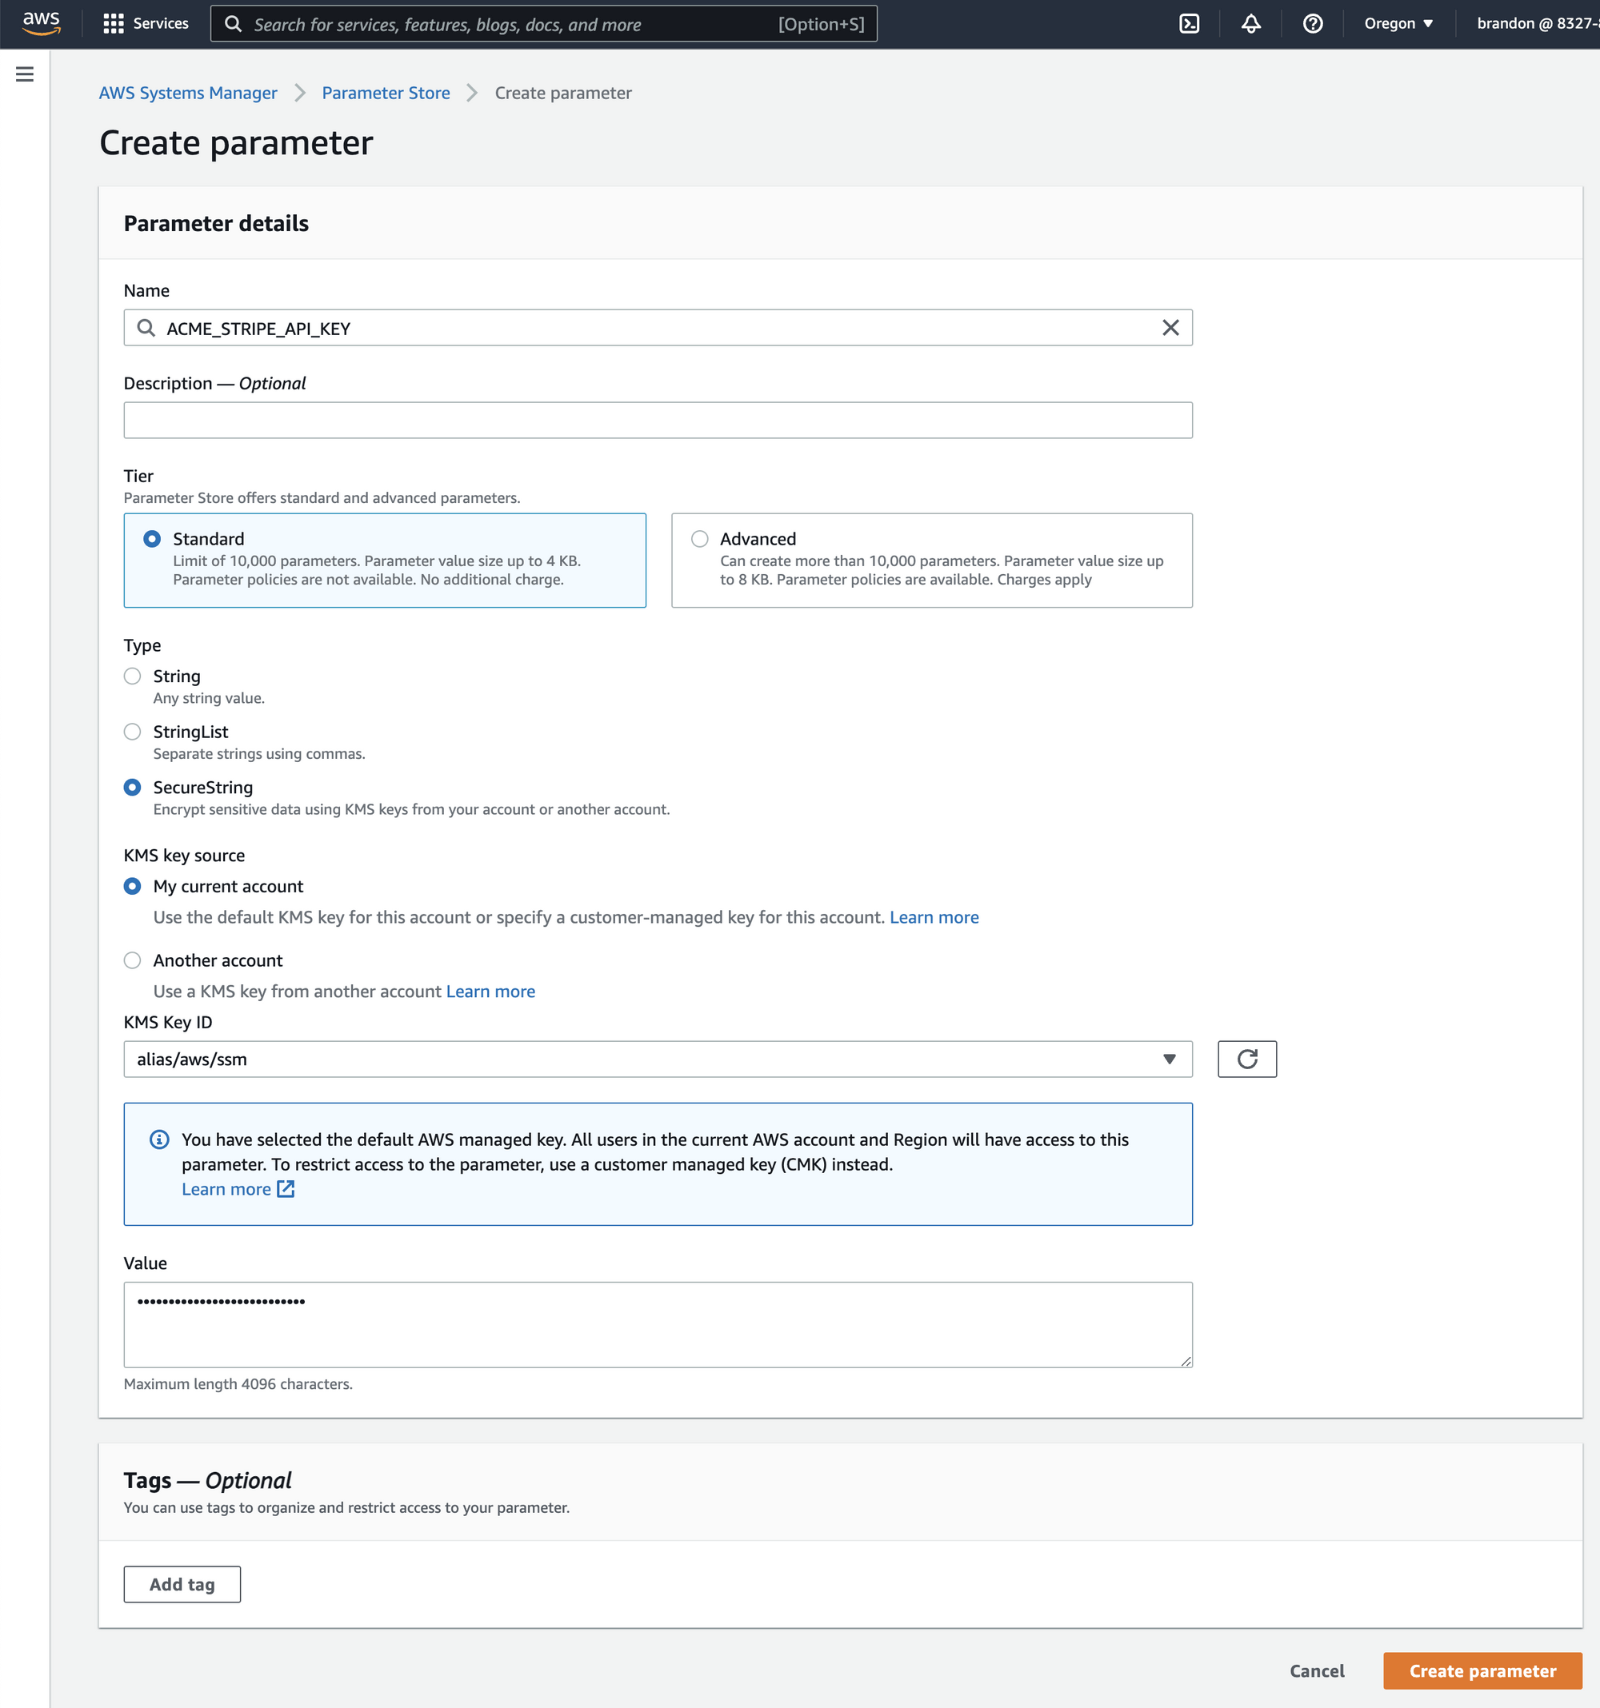 Creating a Parameter on the AWS Parameter Store